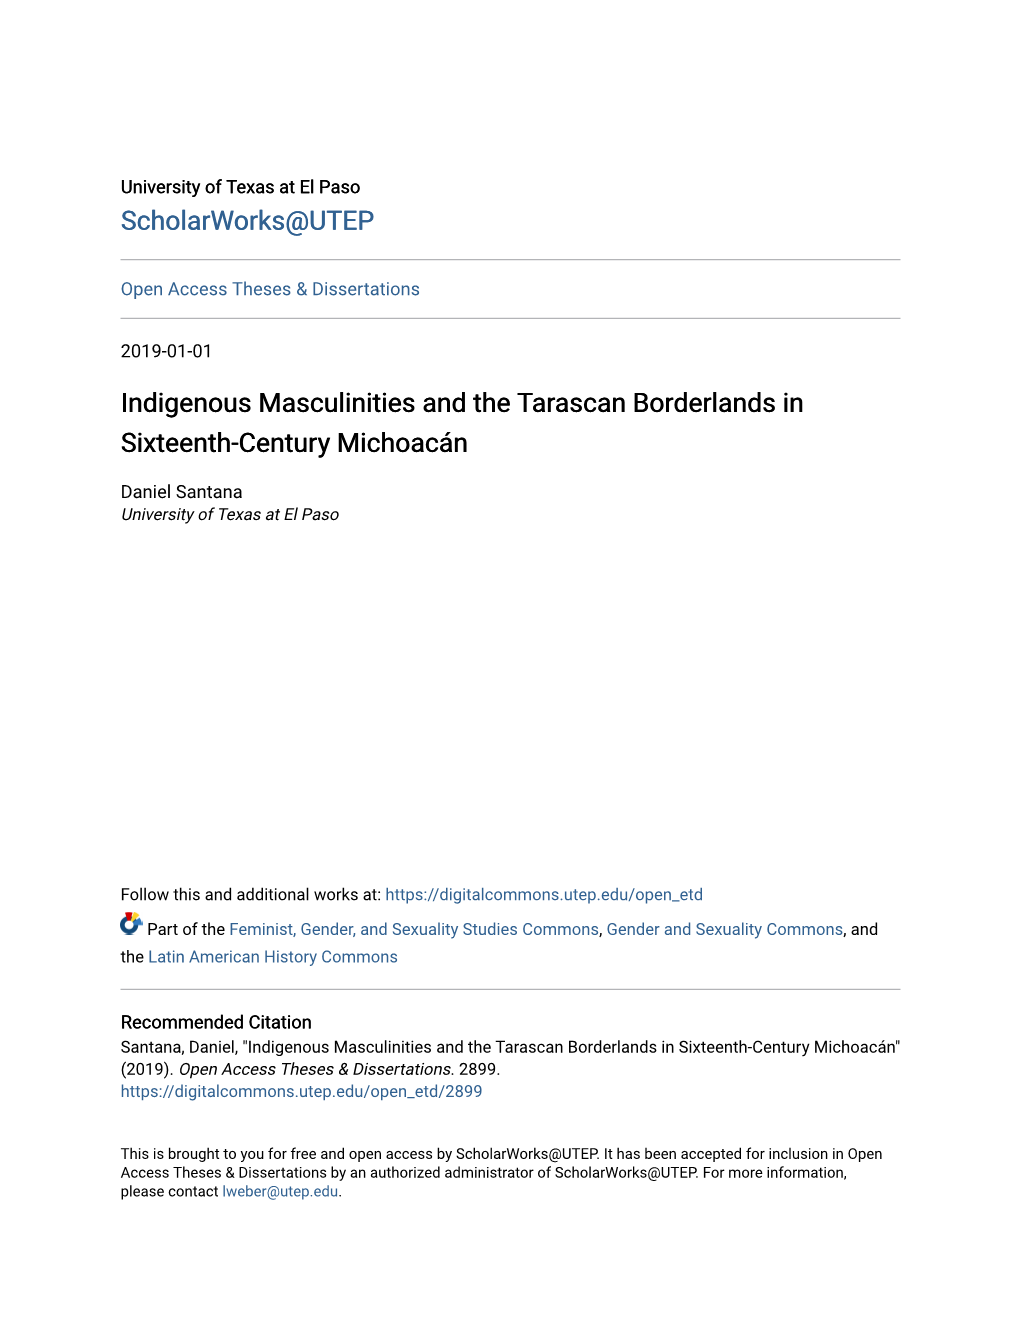 Indigenous Masculinities and the Tarascan Borderlands in Sixteenth-Century Michoacán